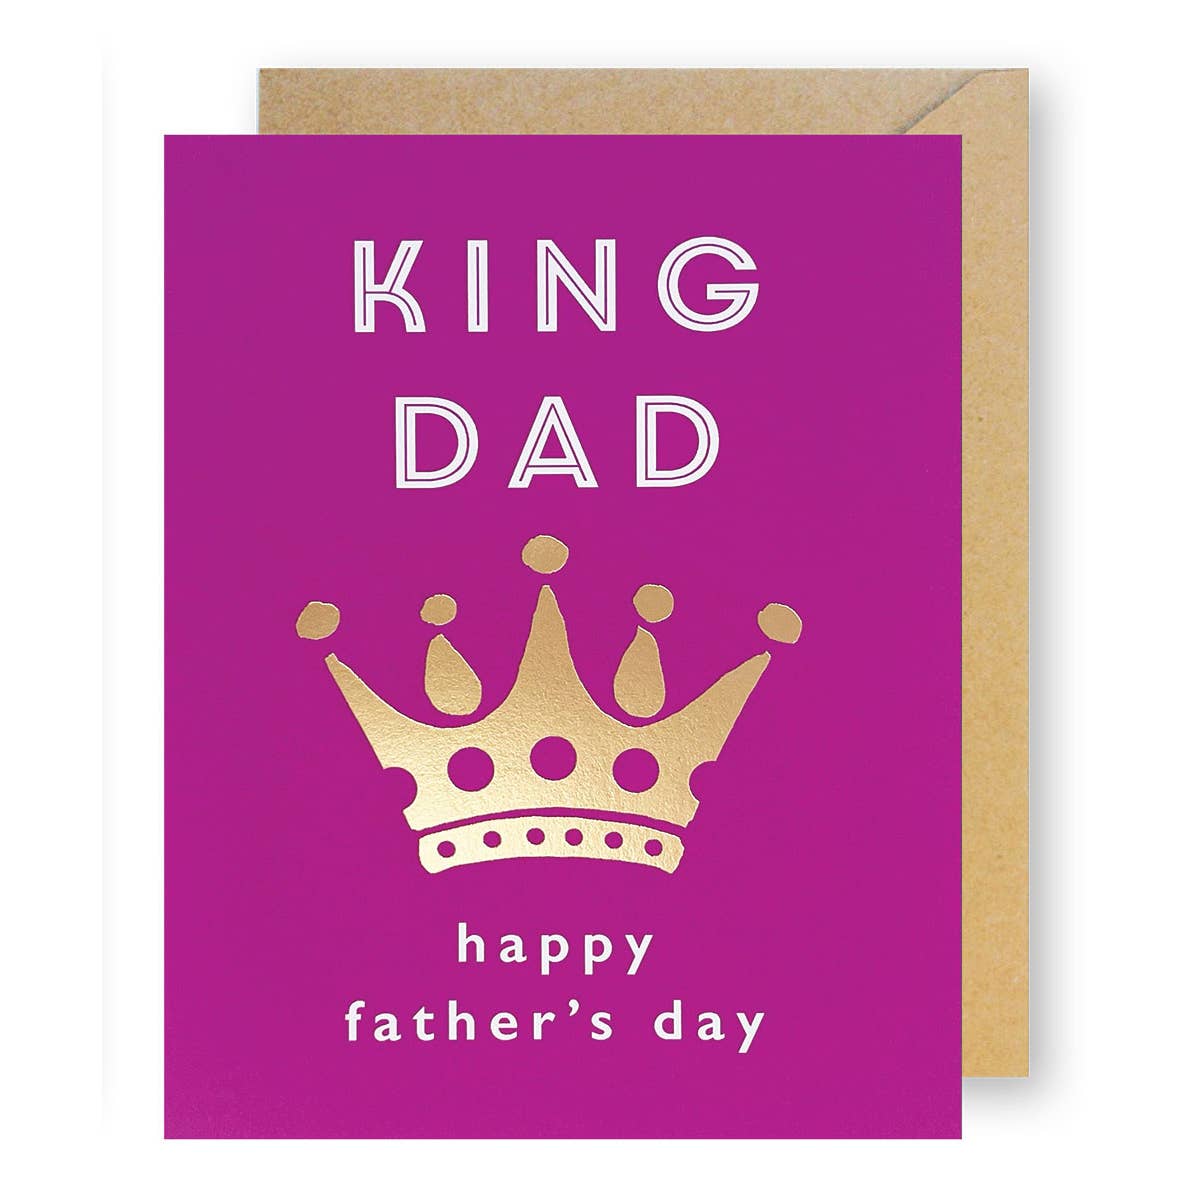 King Dad Father's Day Greeting Card